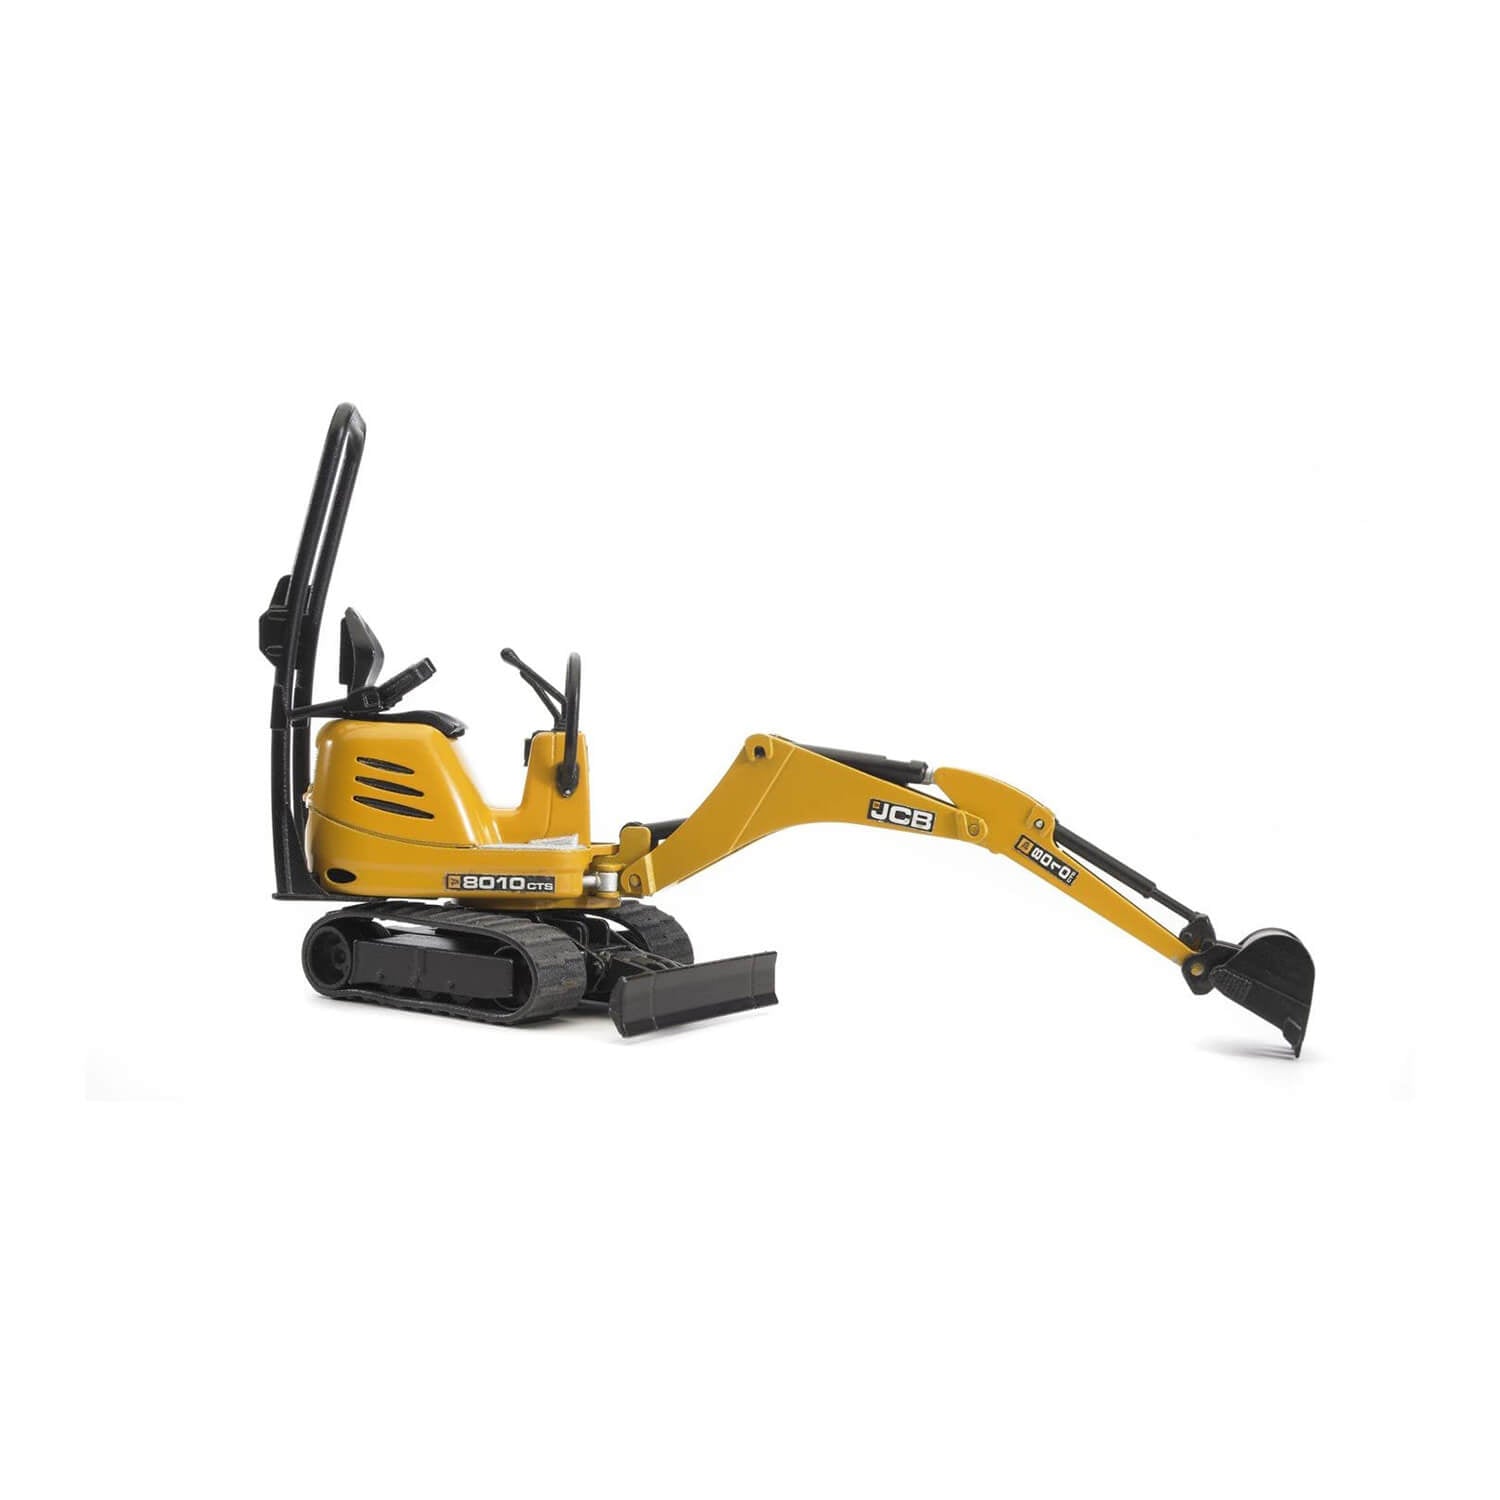 Side view of the Bruder Pro Series JCB Micro Excavator 8010 CTS 1:16 Scale Vehicle.